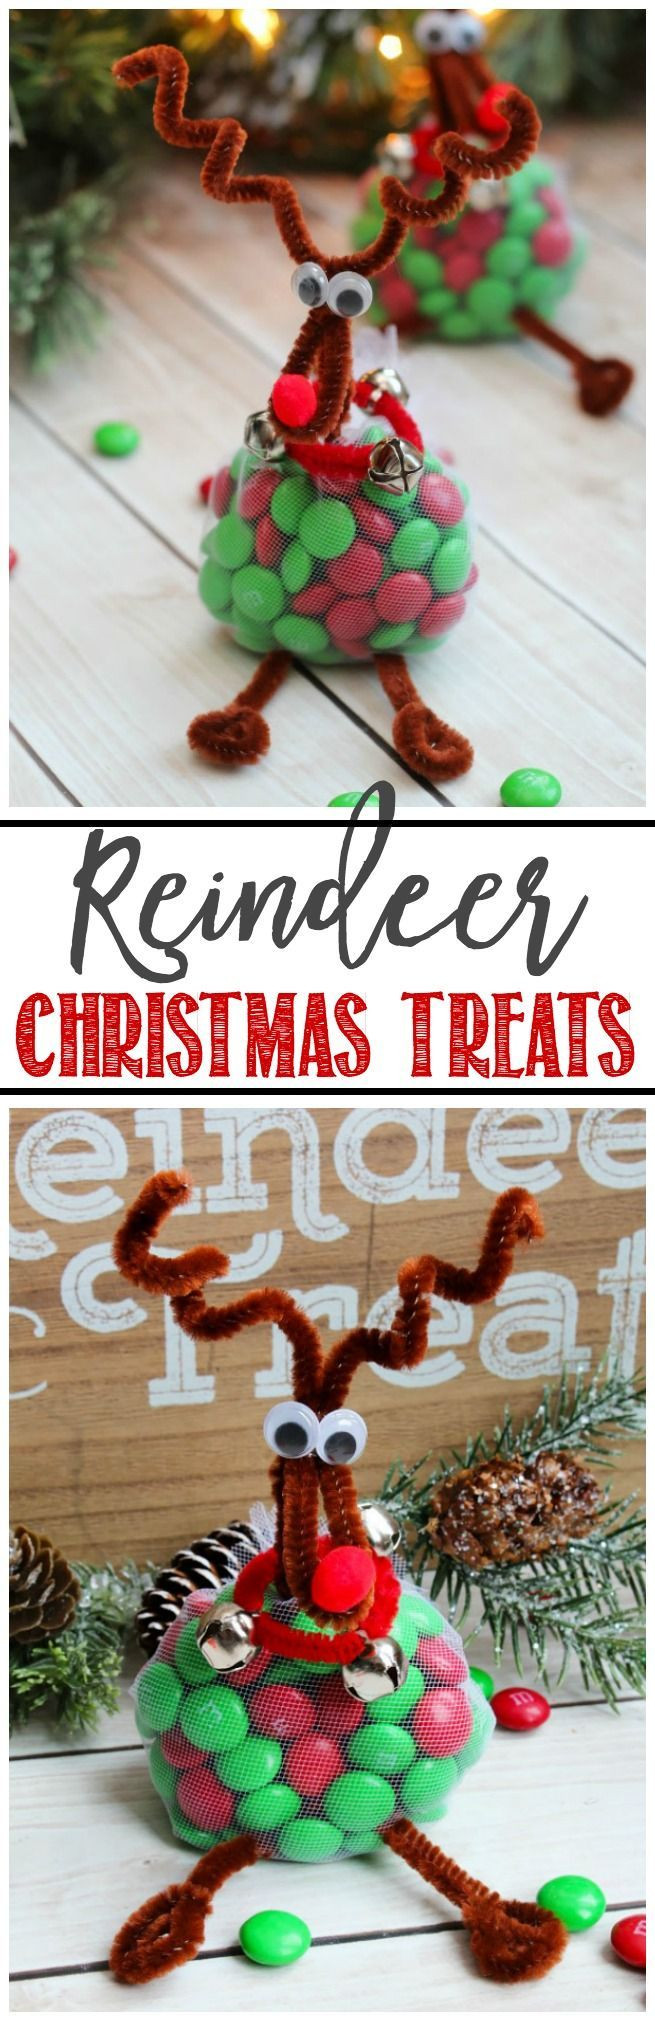 Christmas Candy Gram Ideas
 1000 ideas about Candy Grams on Pinterest